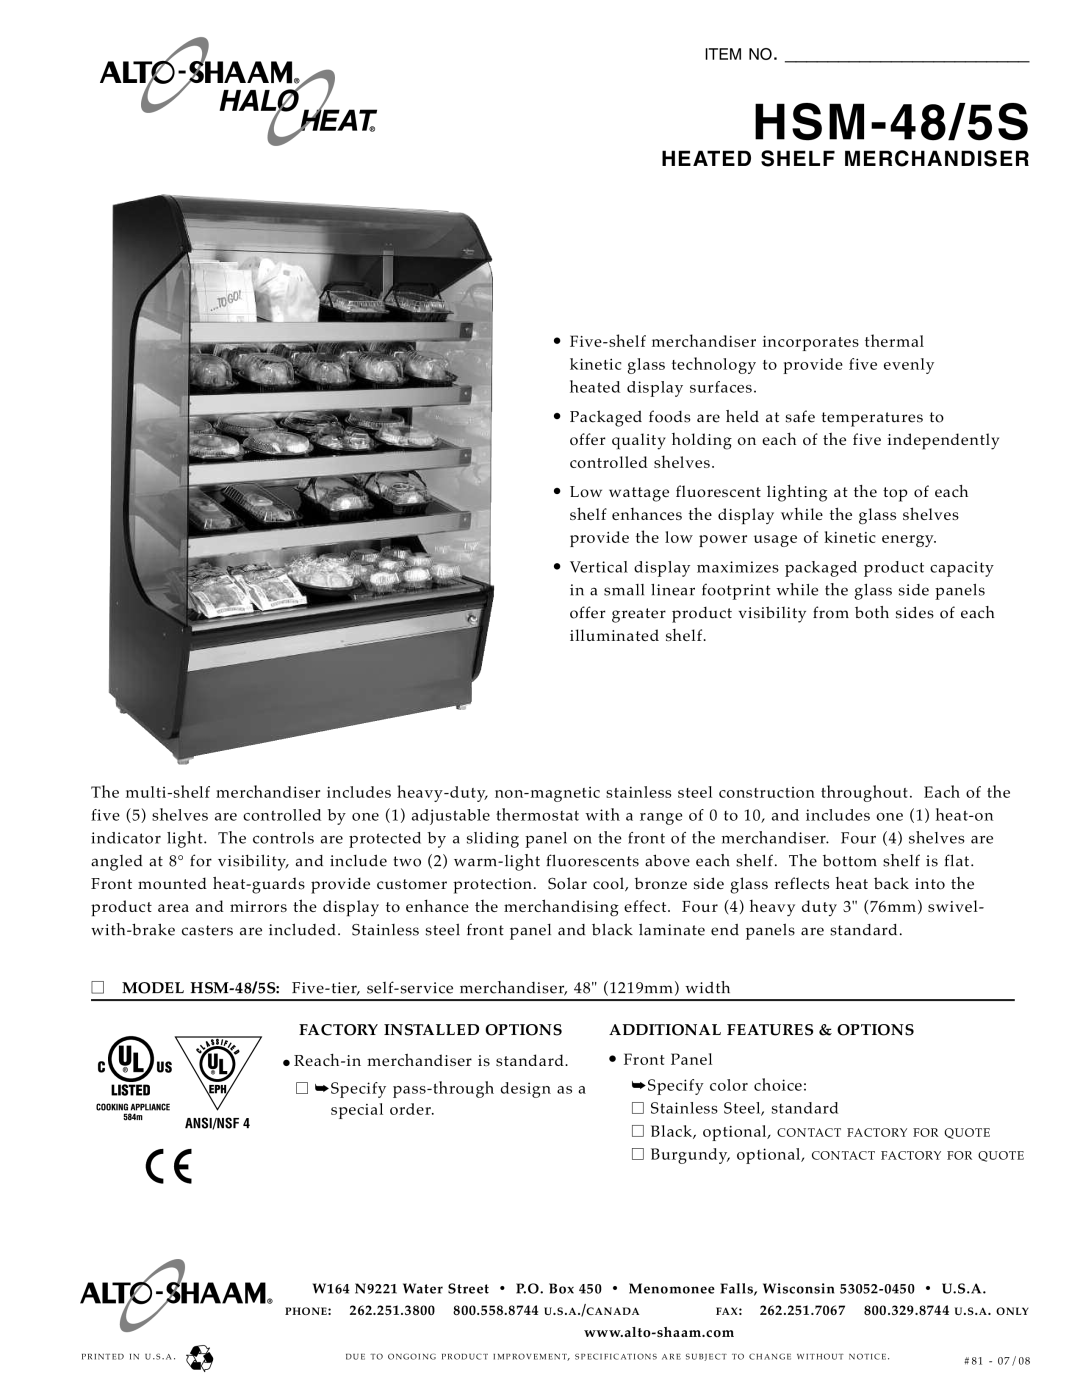 Alto-Shaam HSM-48/5S specifications Heated Shelf Merchandiser, Item No, Additional Features & Options 